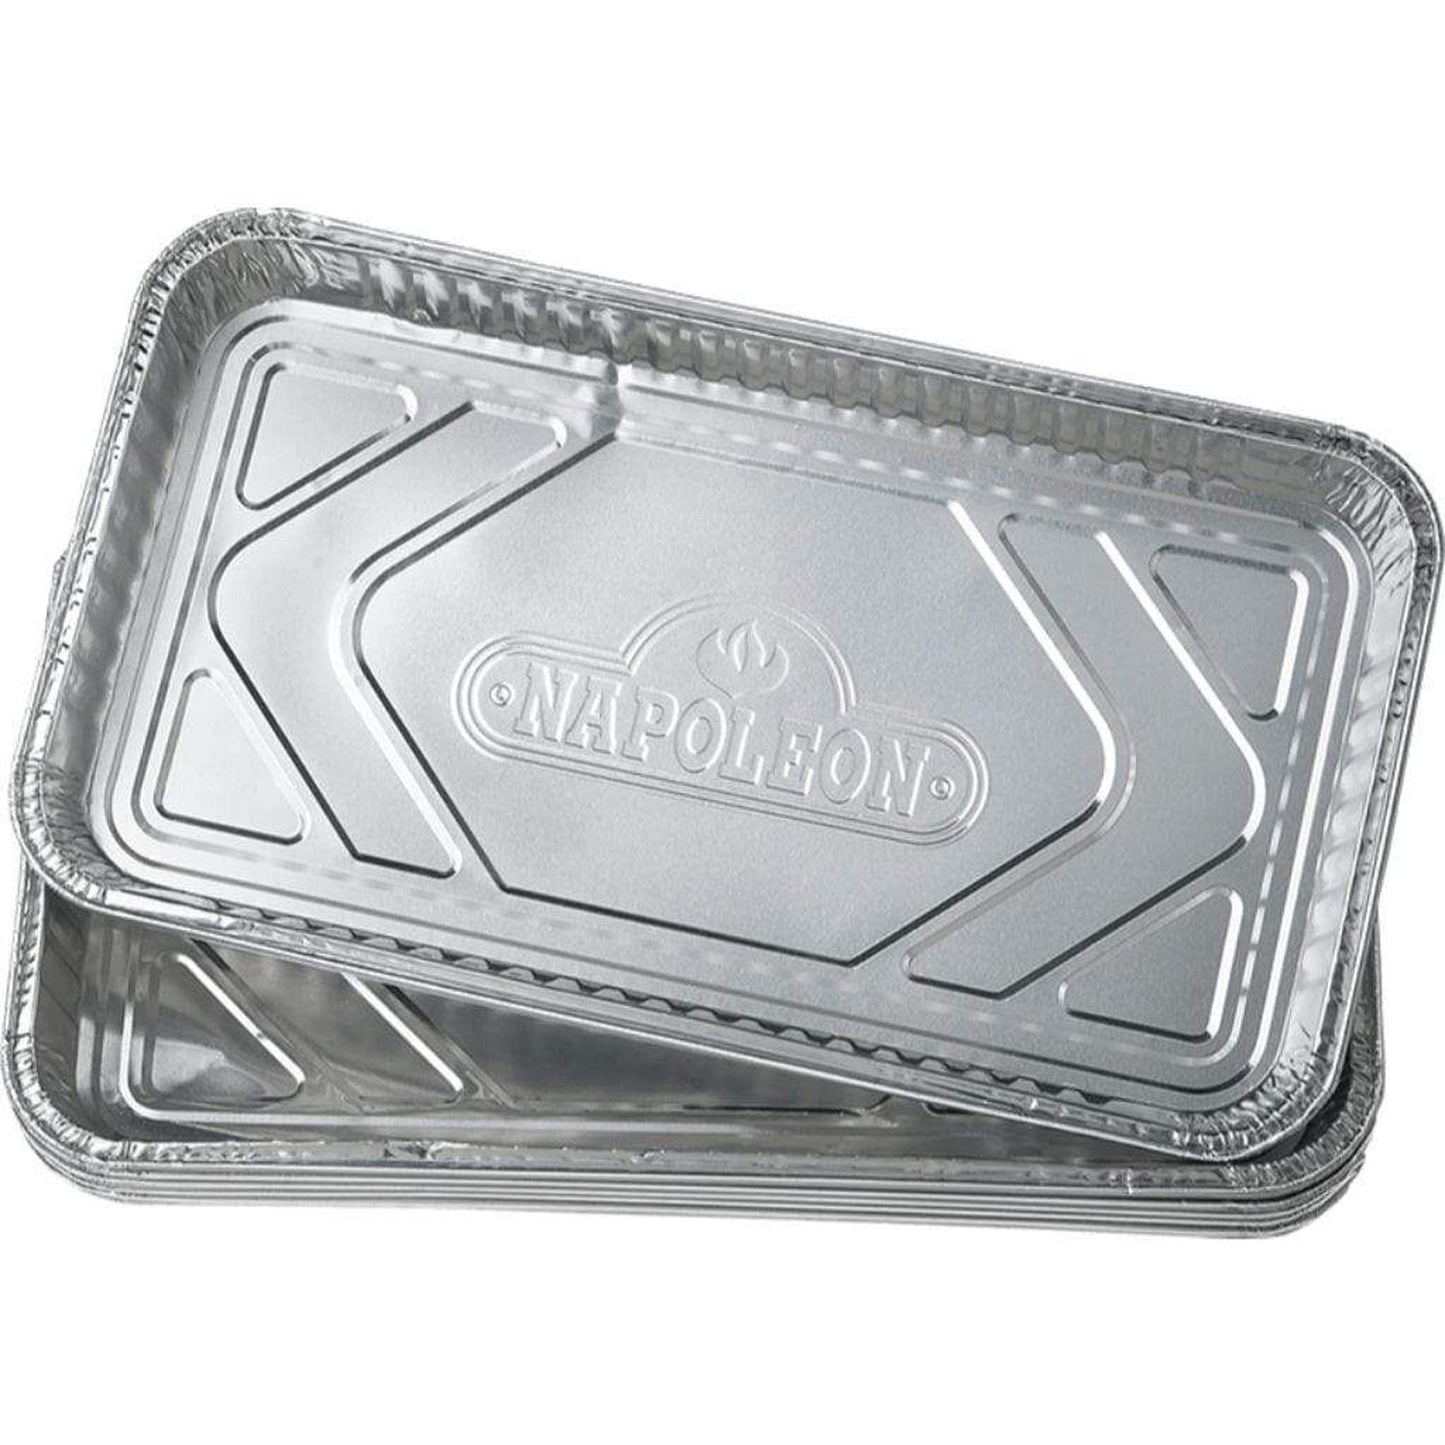 Napoleon 62008 Large Grease Drip Trays (14" x 8") - Pack of 5